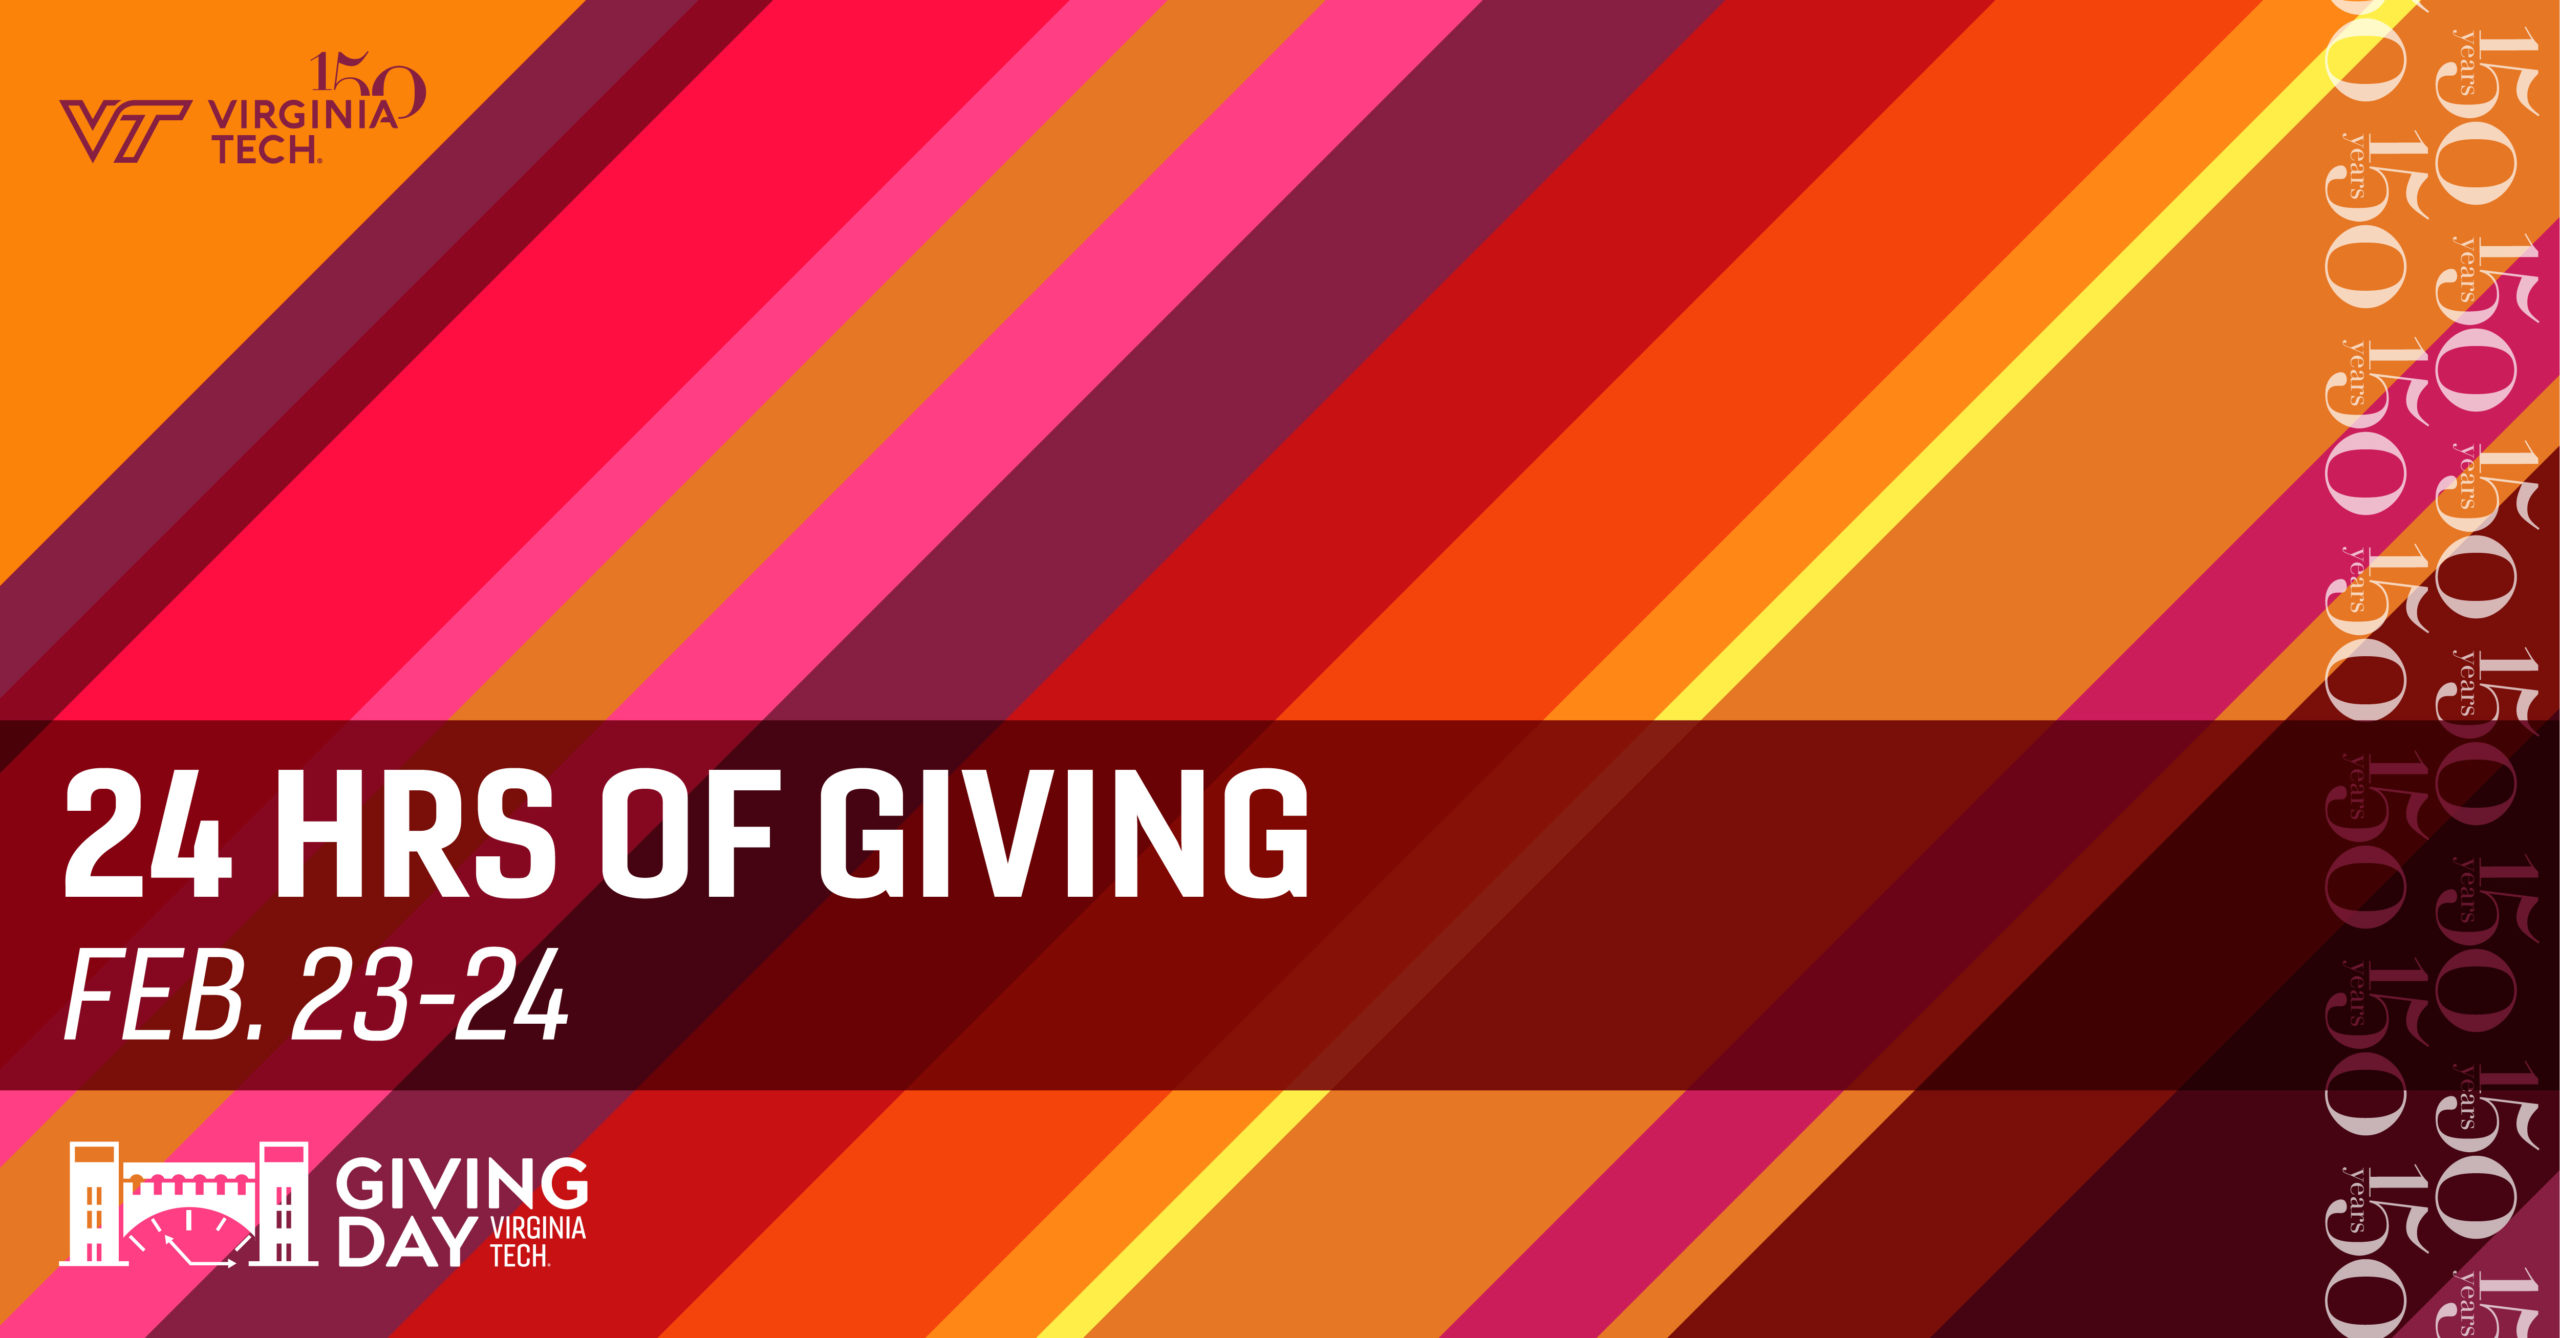 Giving Day